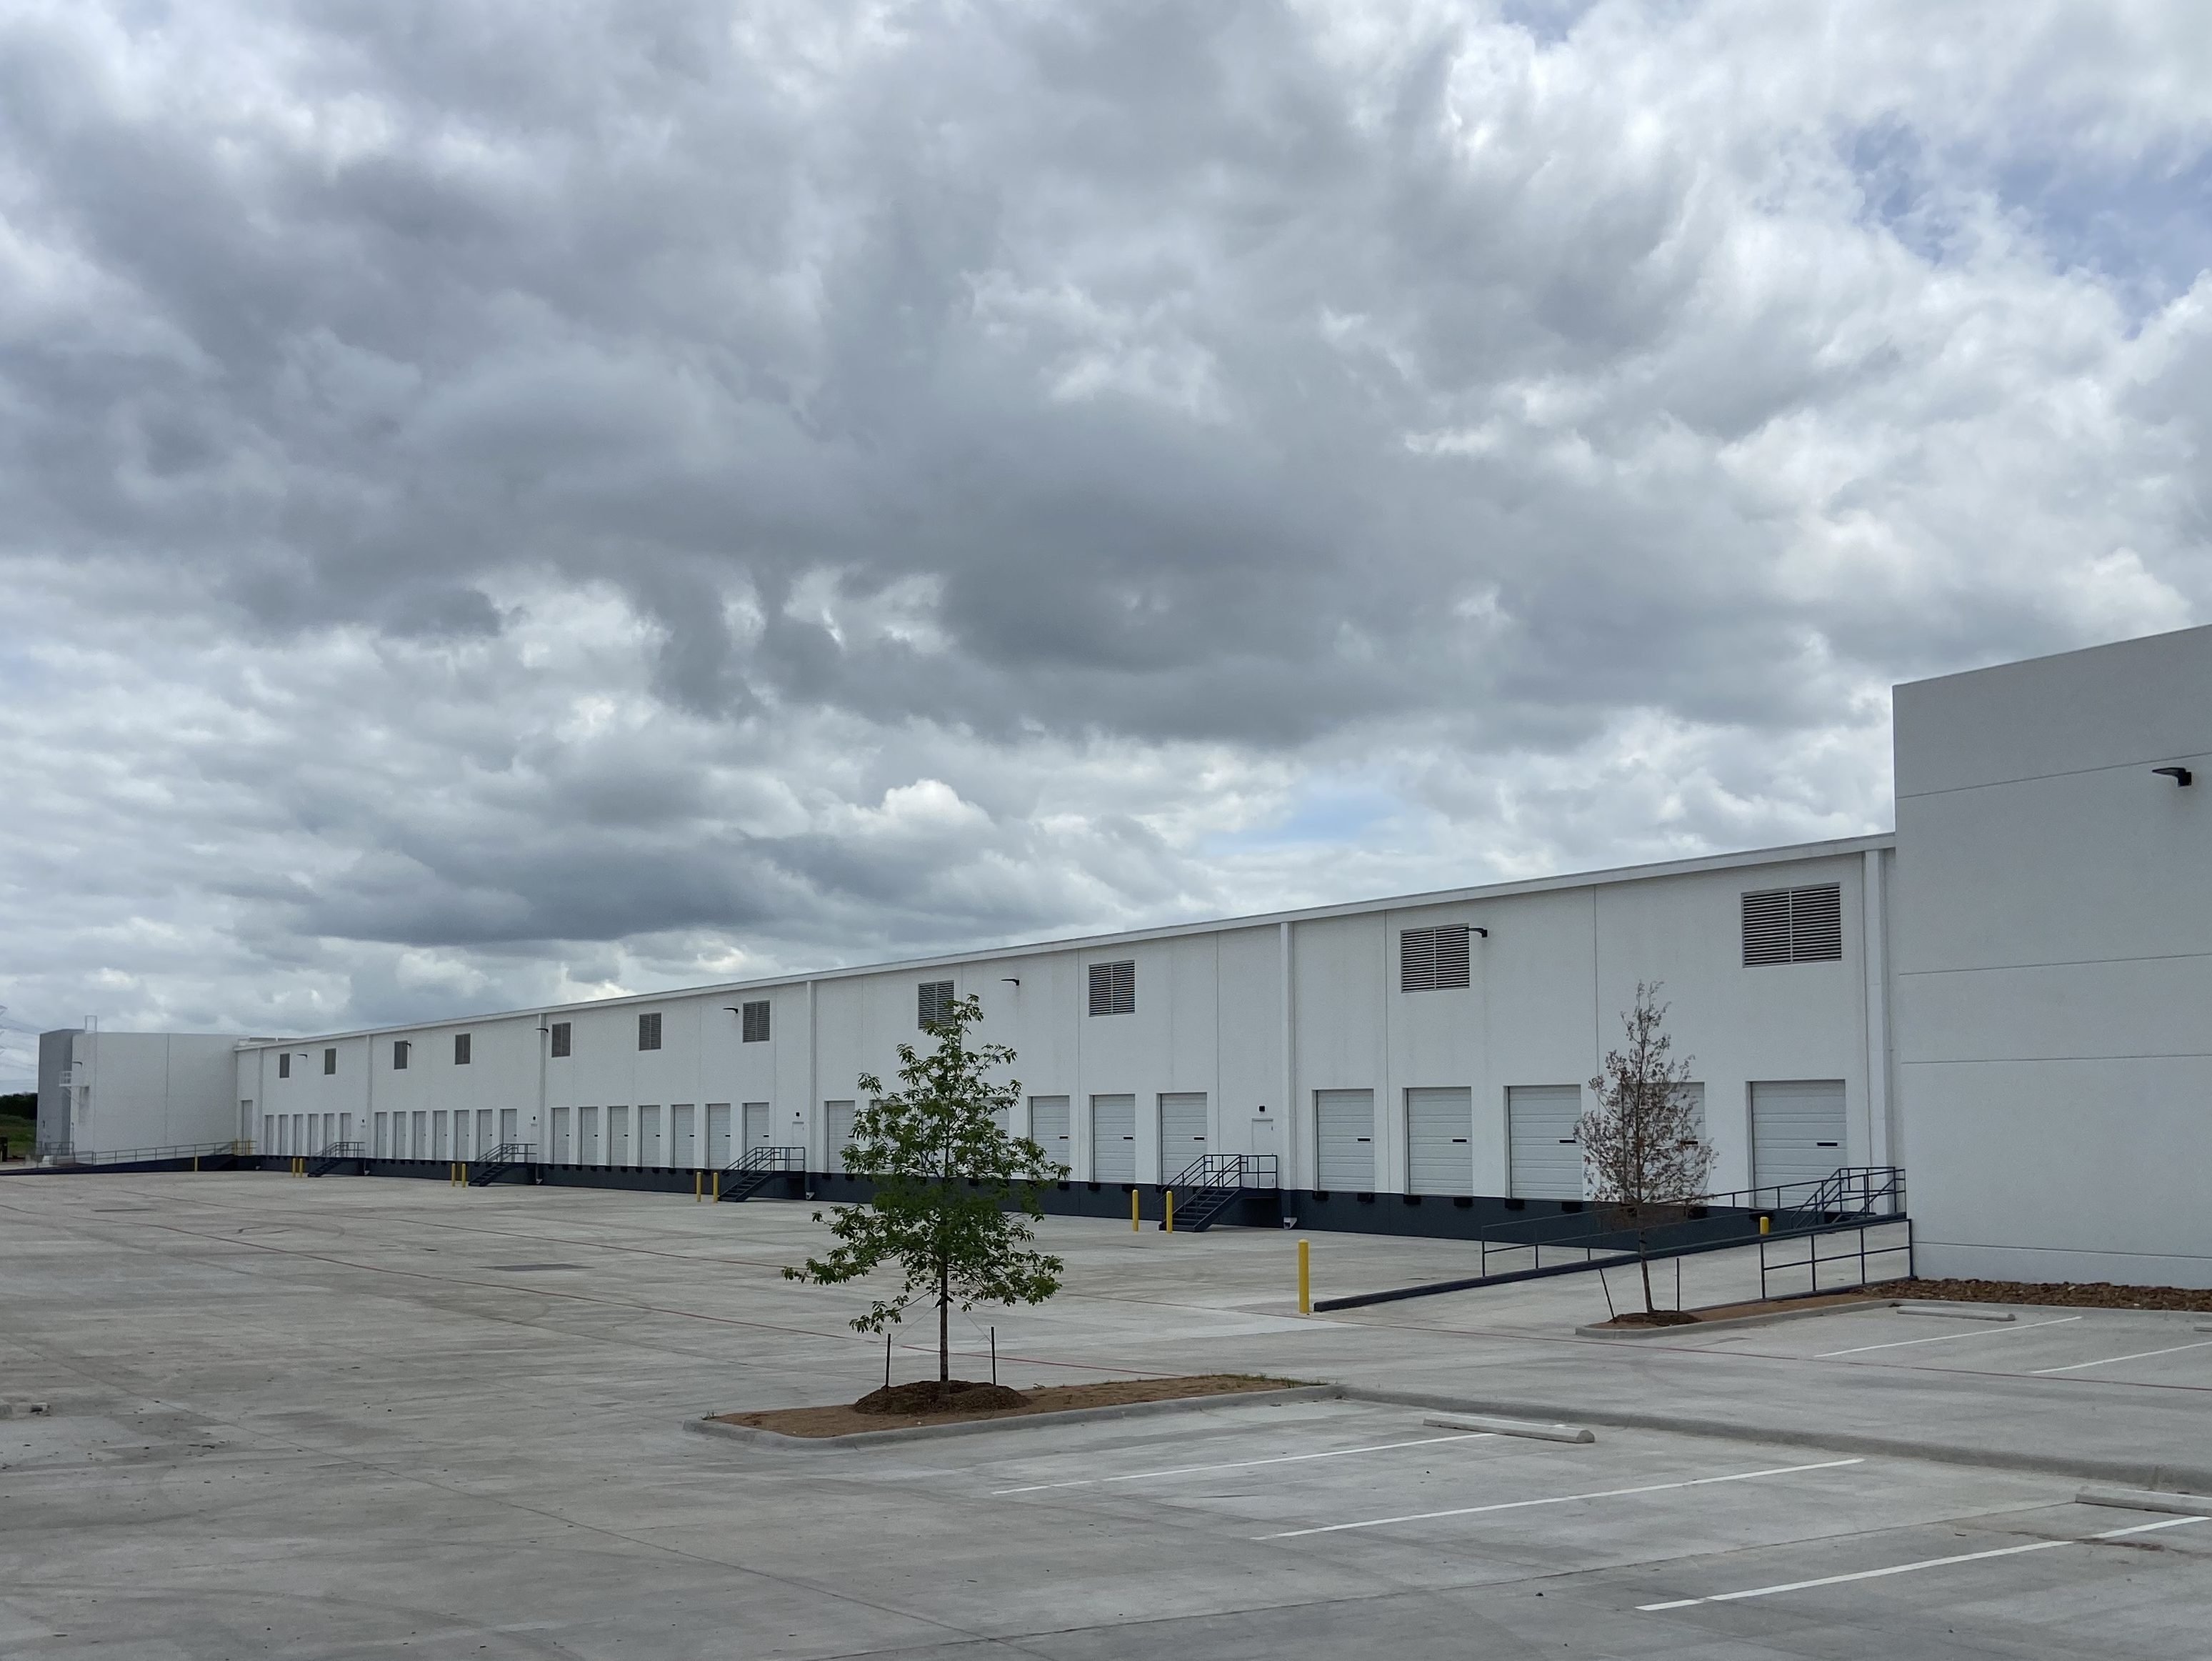 Four D-FW properties included in storage center sale